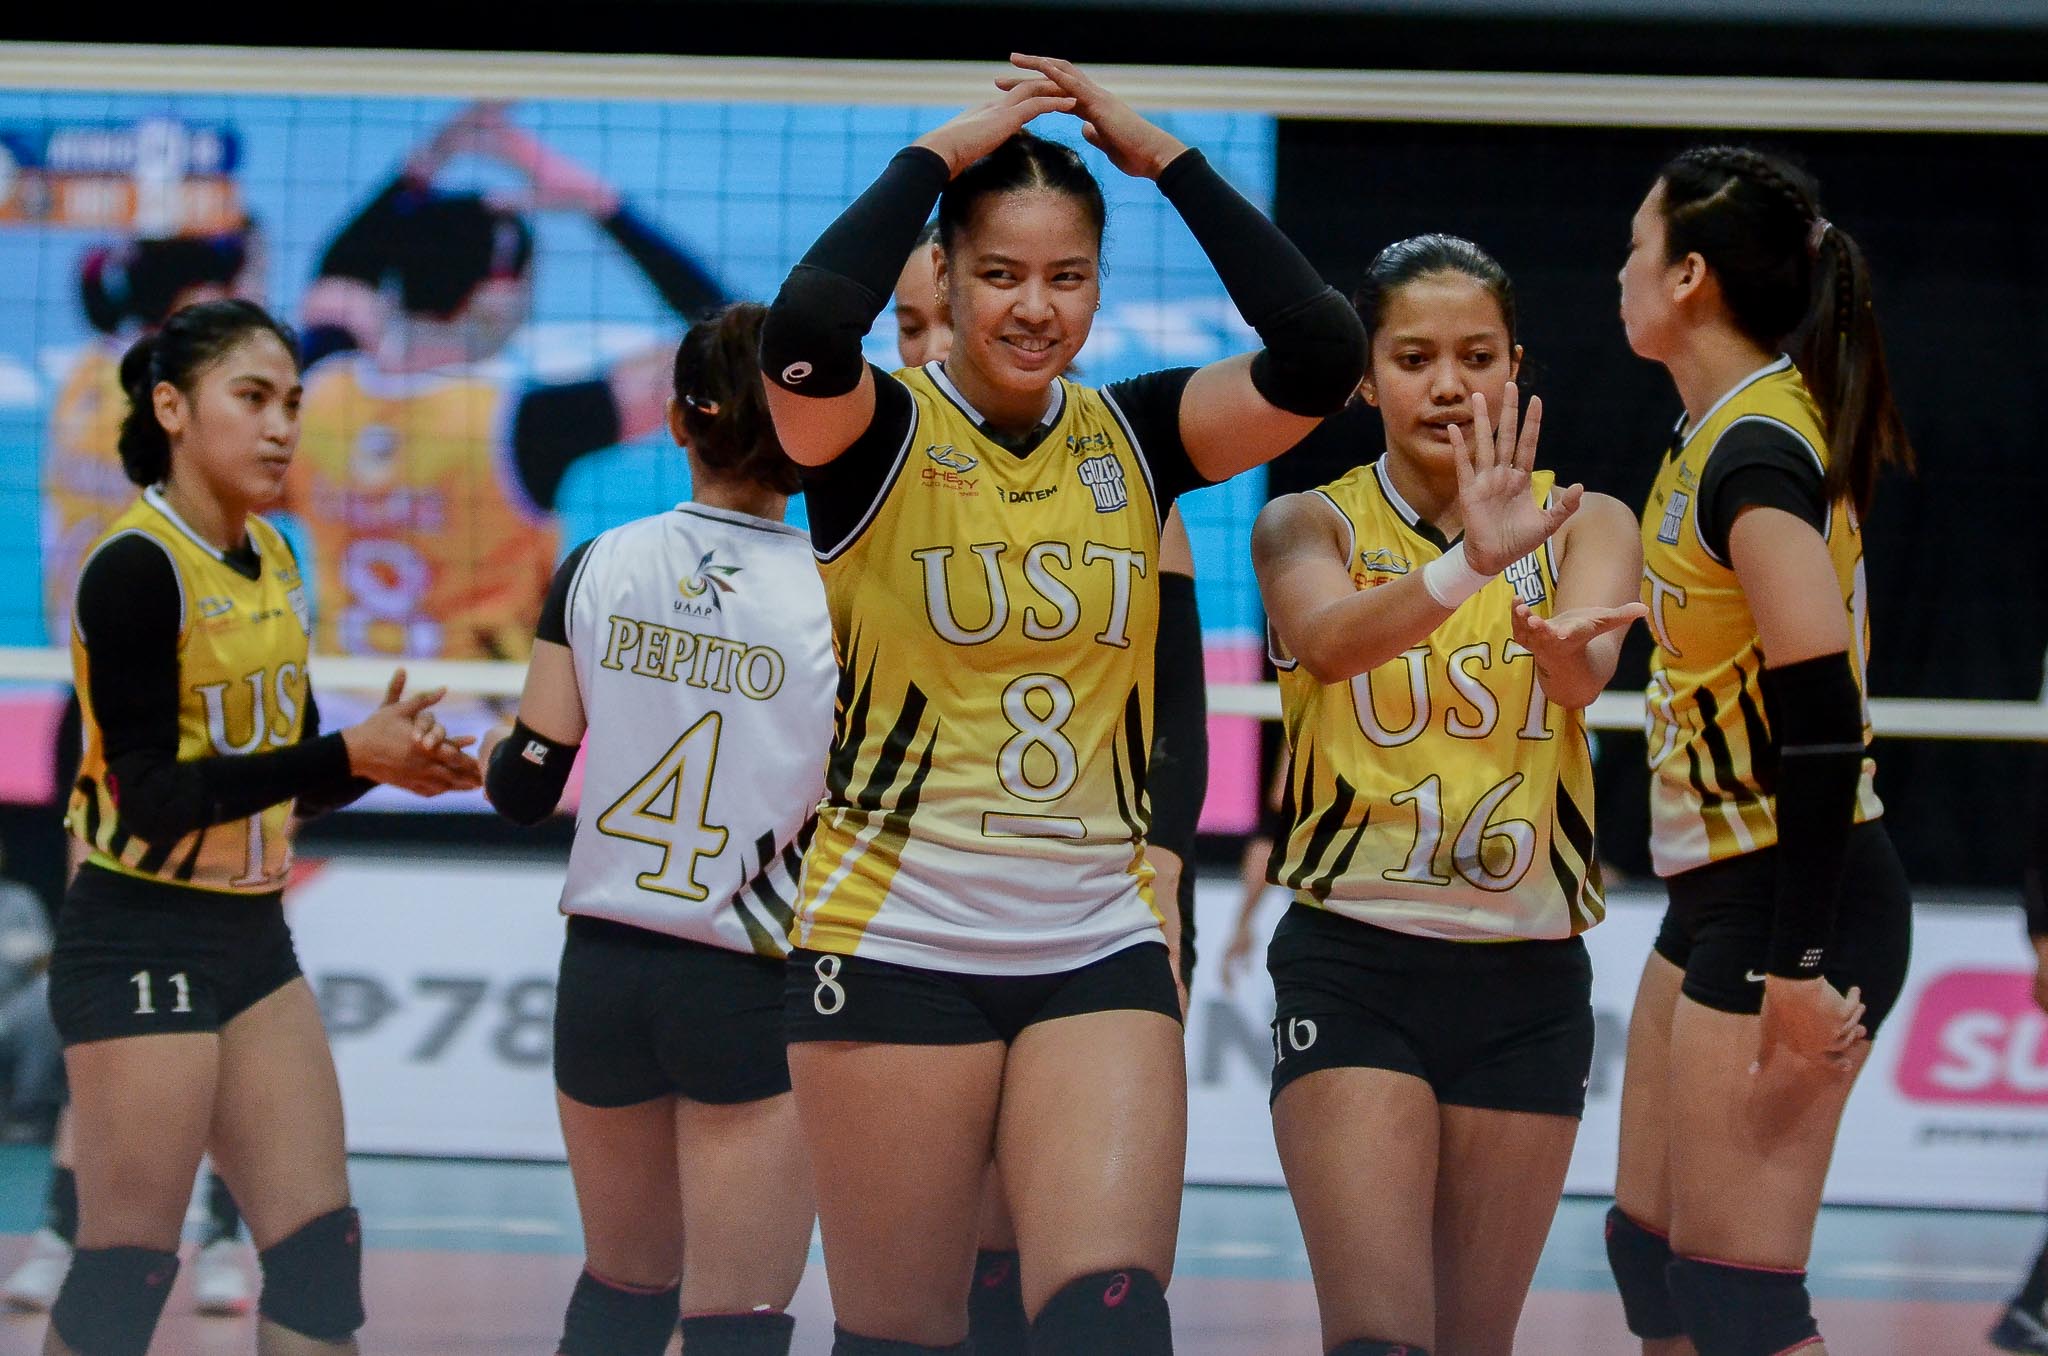 Eya Laure (No. 8) leads a UST squad that features young standouts like Bernadette Pepito (No. 4) and Maji Mangulabnan (No. 16) who, like her, come from UST’s high school program. —UAAP MEDIA